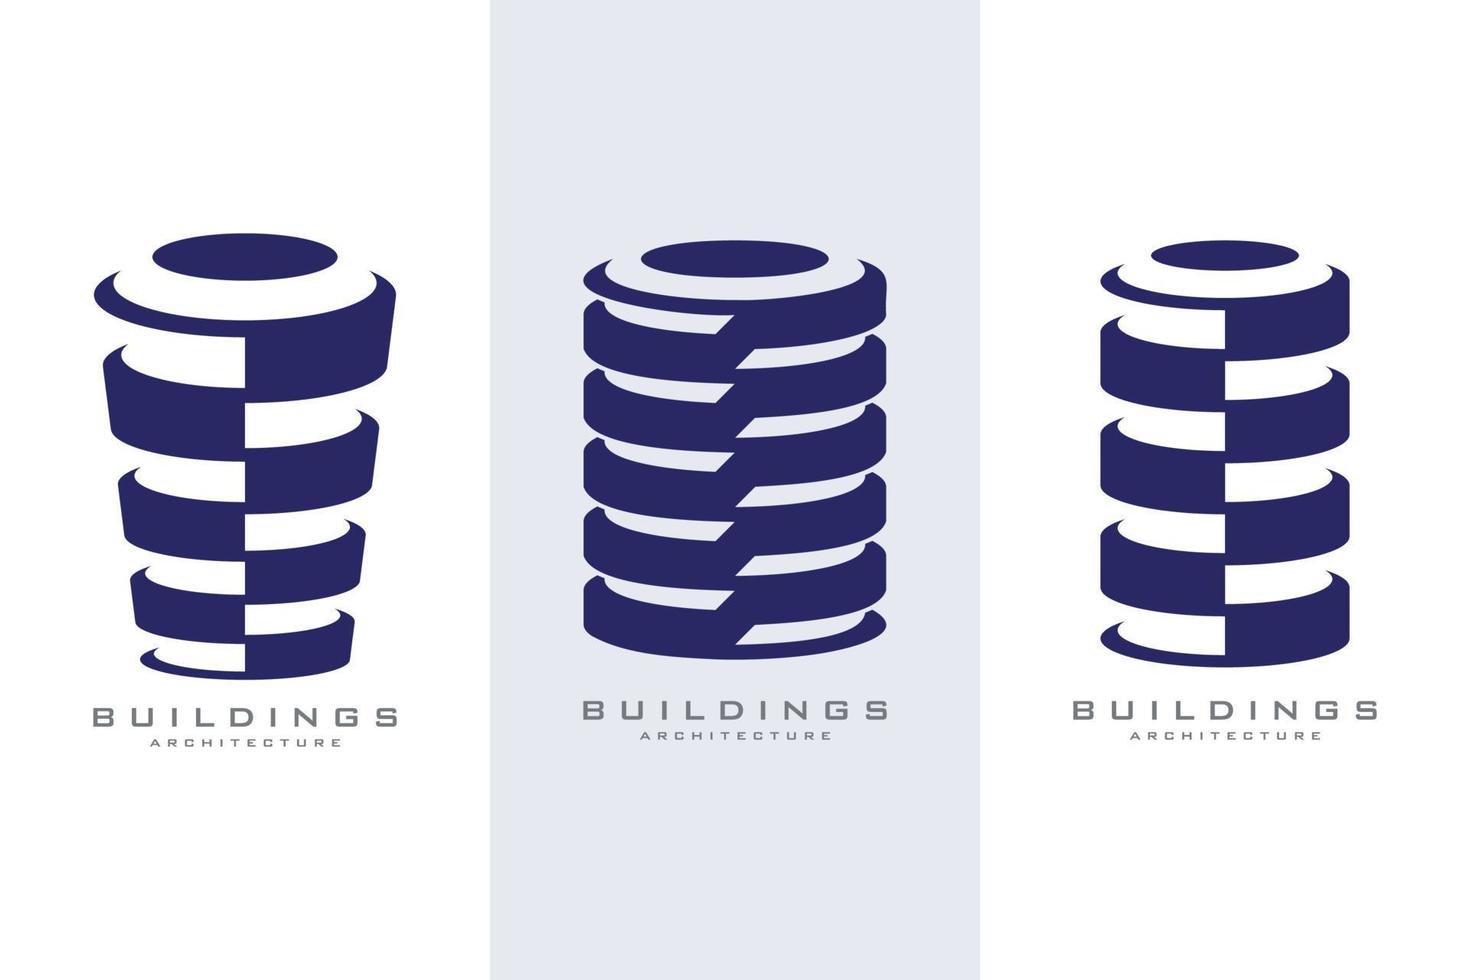 logo collection of buildings architecture real estate industry. vector